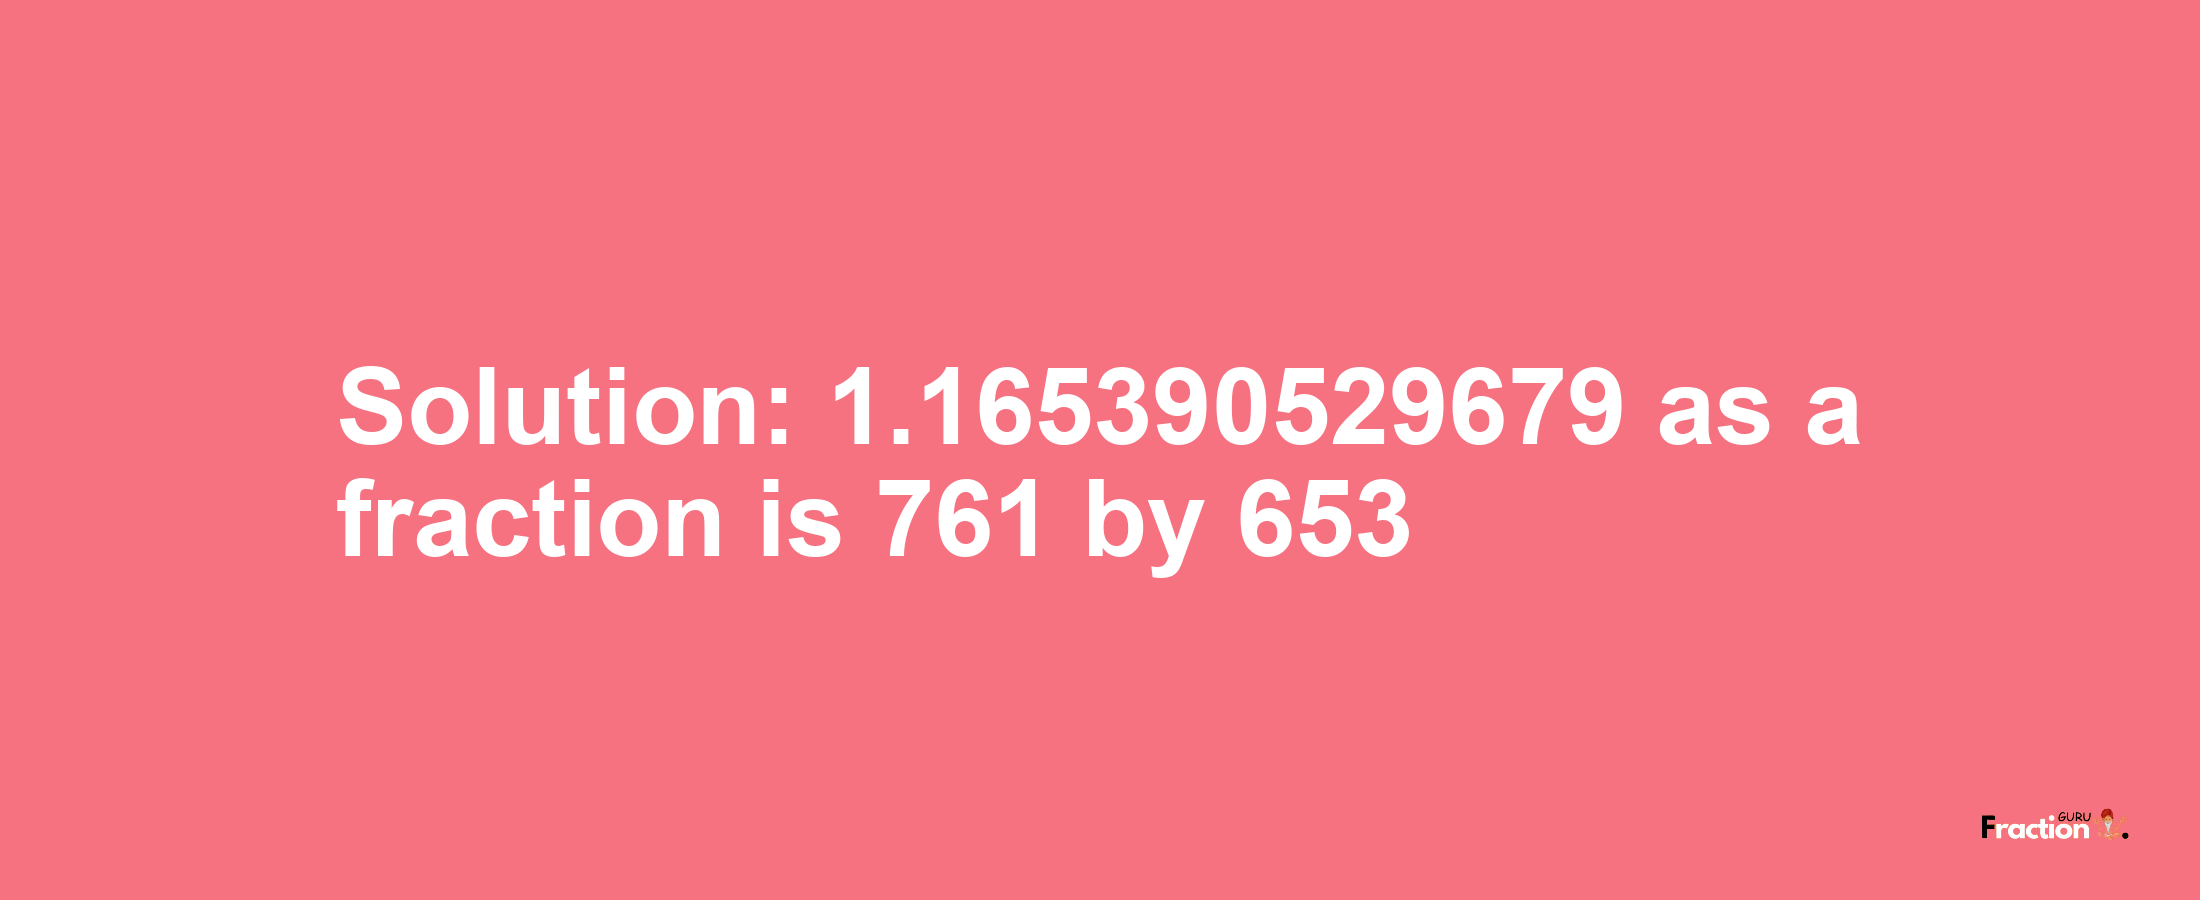 Solution:1.165390529679 as a fraction is 761/653